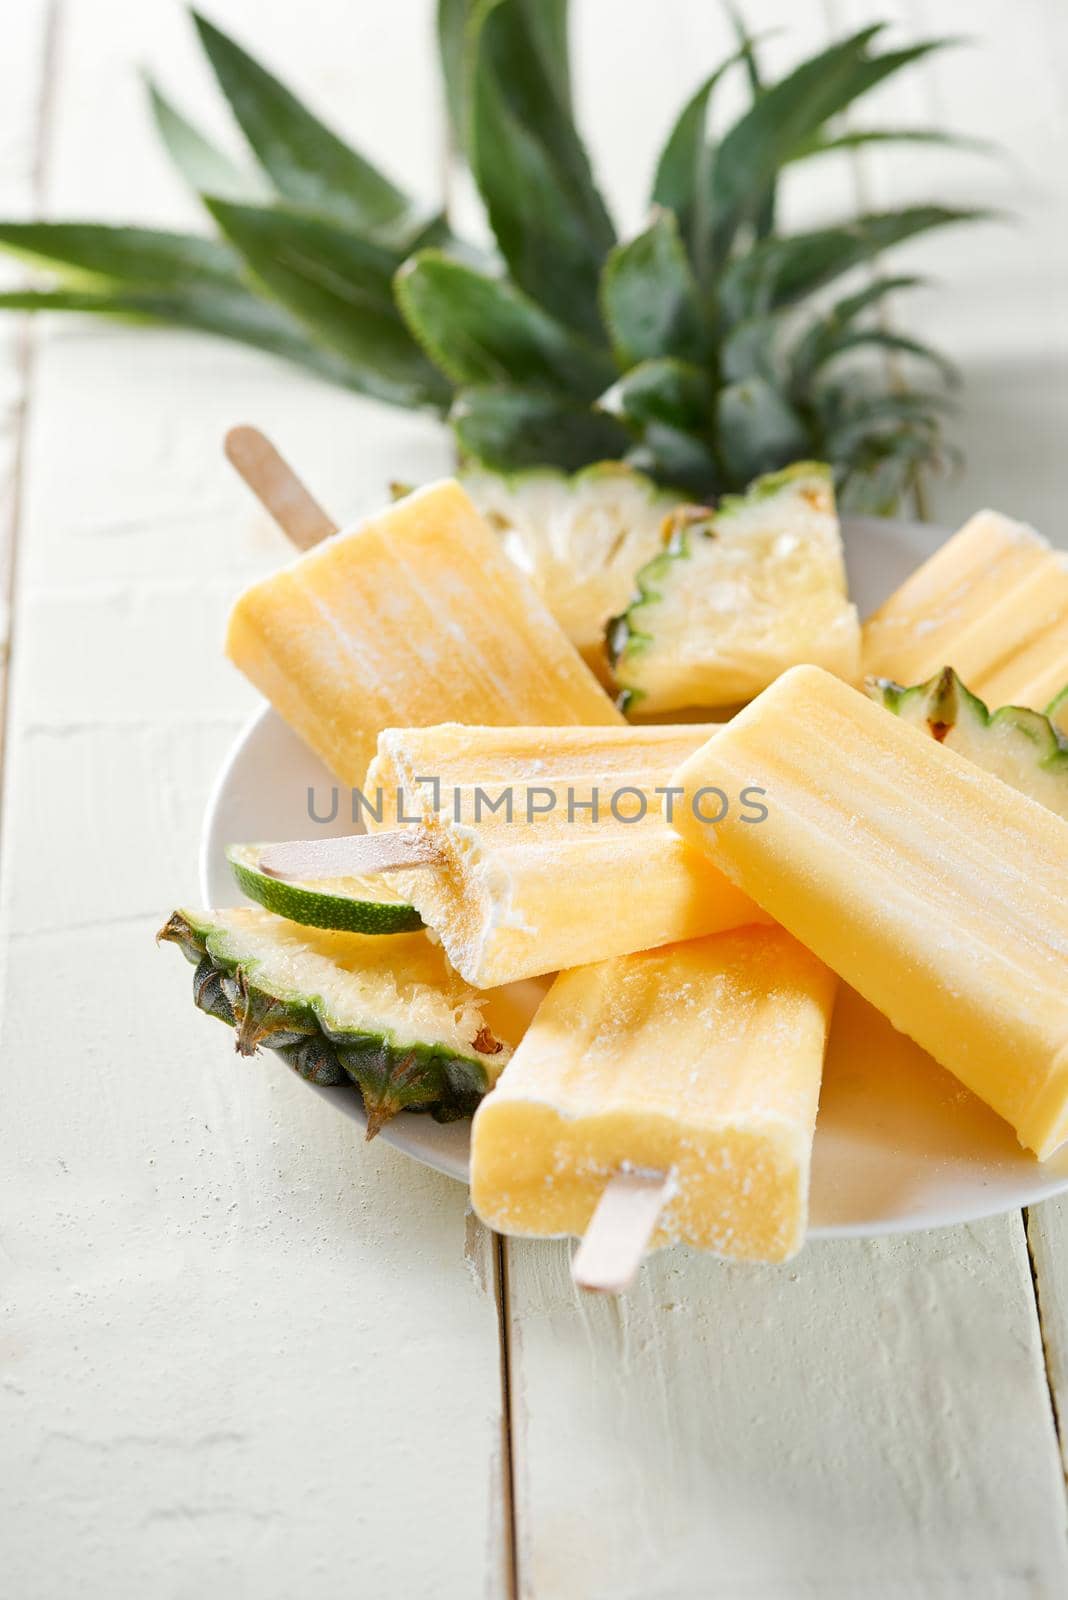 Yellow fruit popsicles on a plate. Top view over a white wood background.